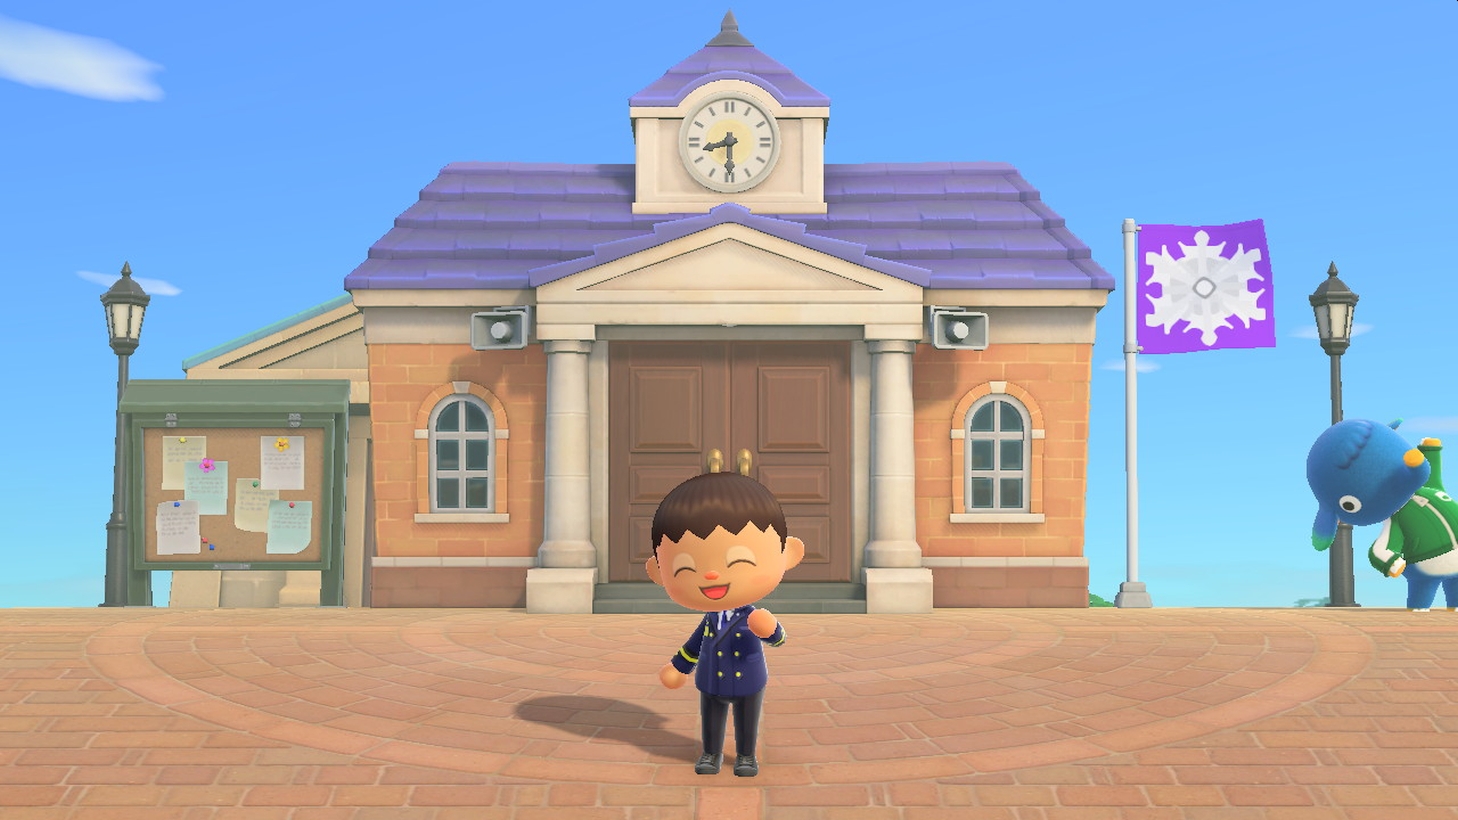 Tokyo Fire Department Uses Animal Crossing: New Horizons To Share Disaster Prevention Information